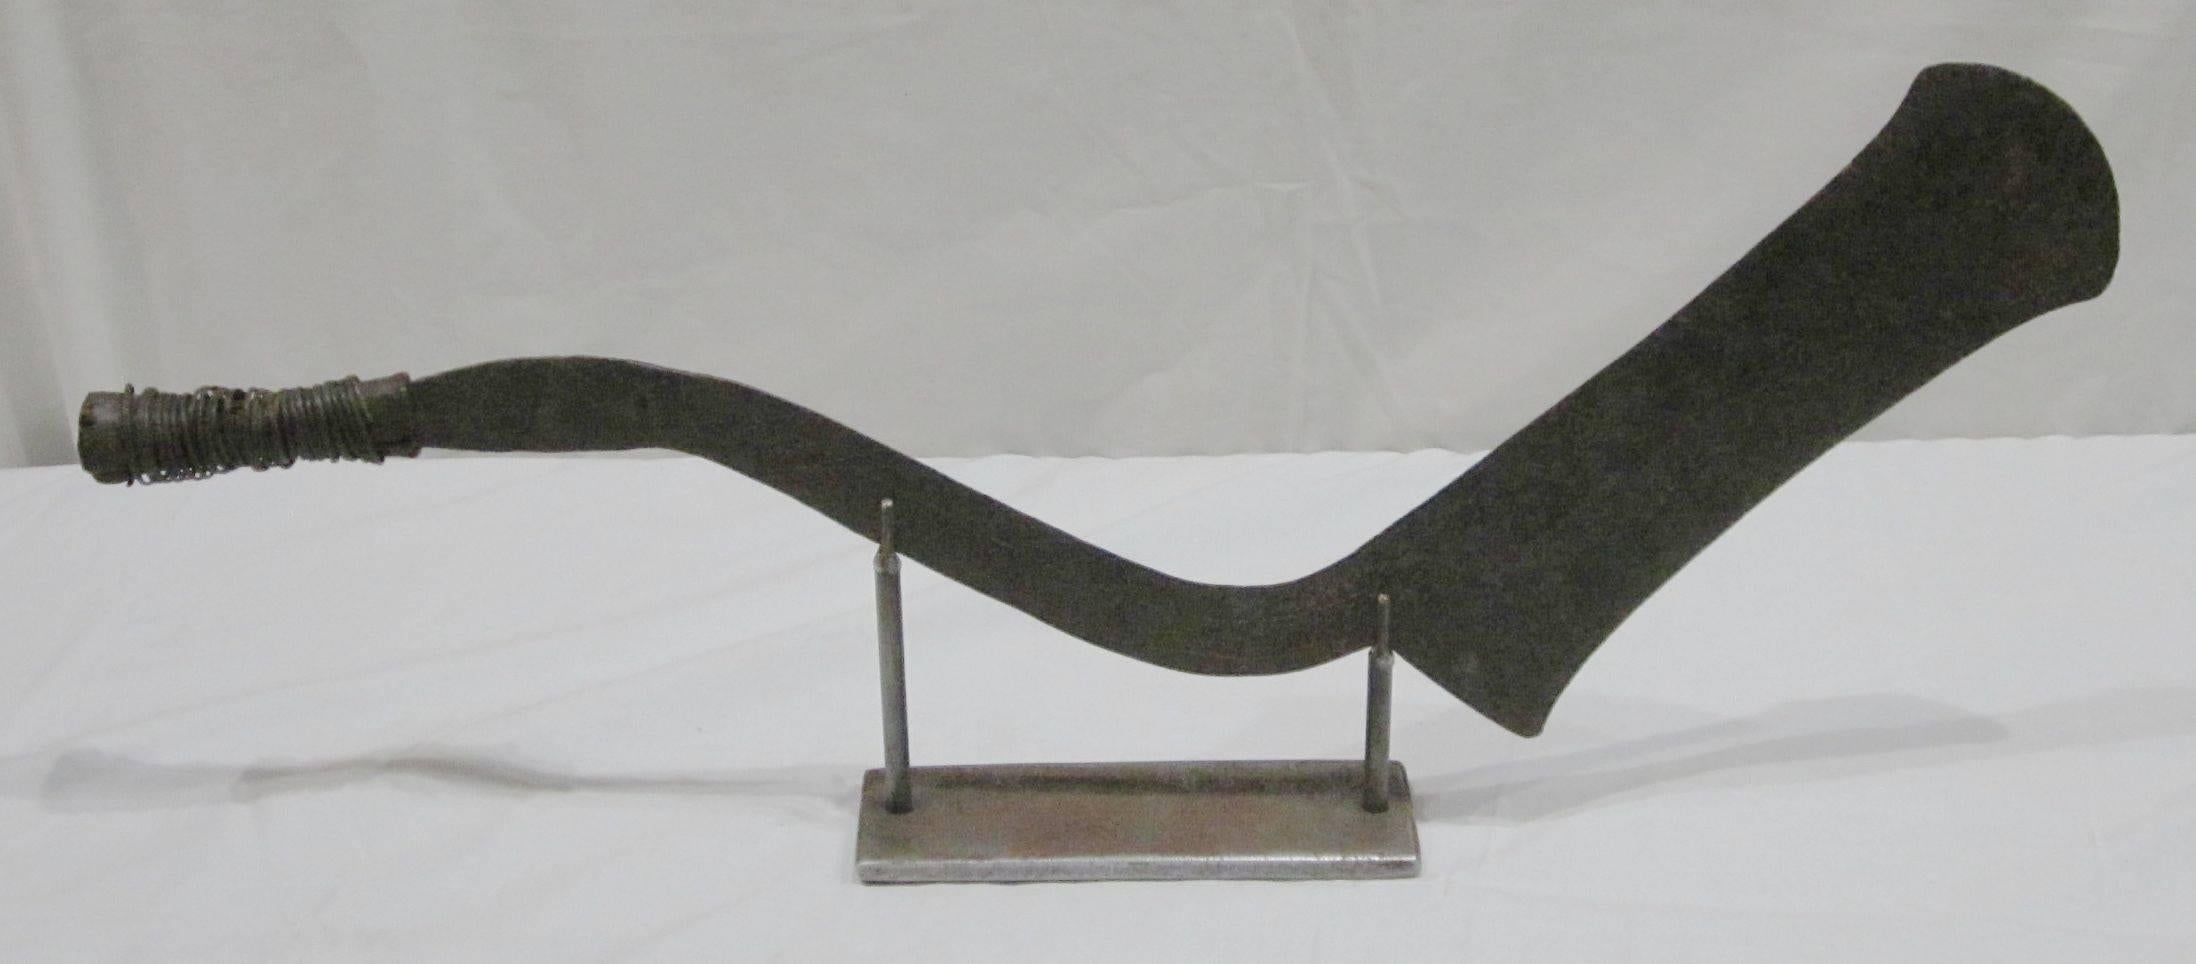 1920s African Congolese sword sculpture on metal stand.
Base measures 10